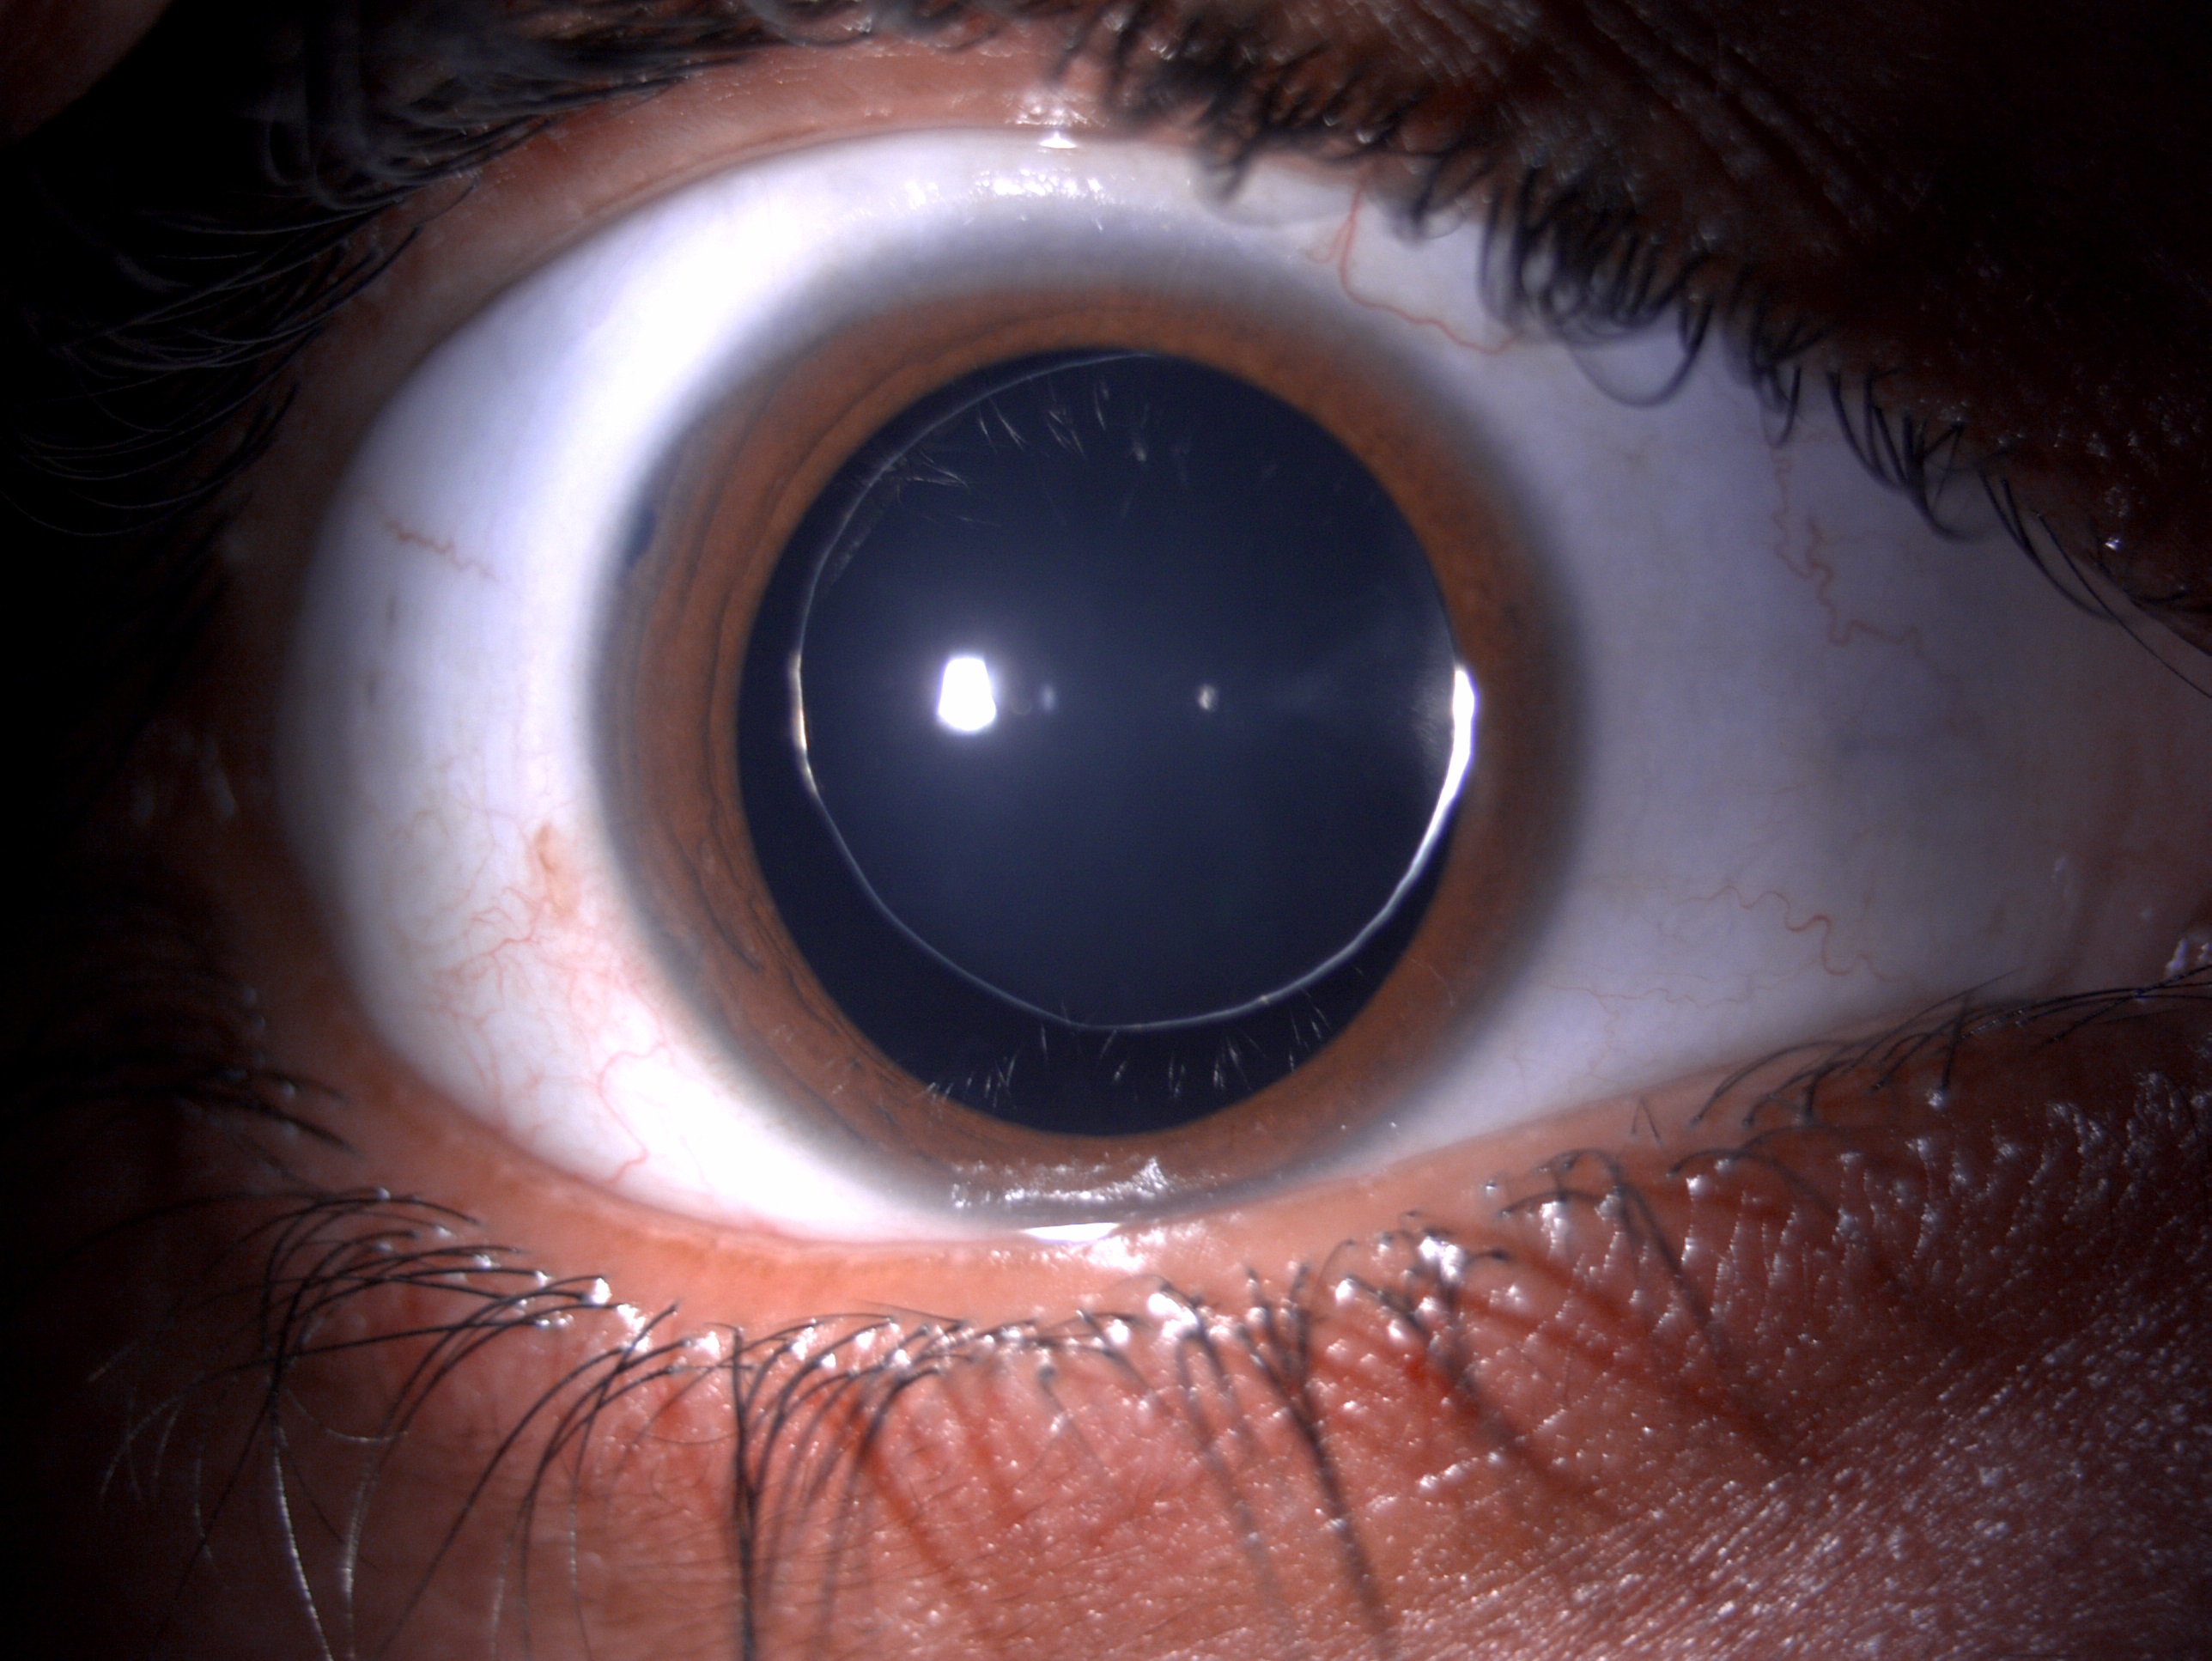 Digital slit lamp image of the patient depicting small microspherophakic clear lens with equator of lens visible under full m